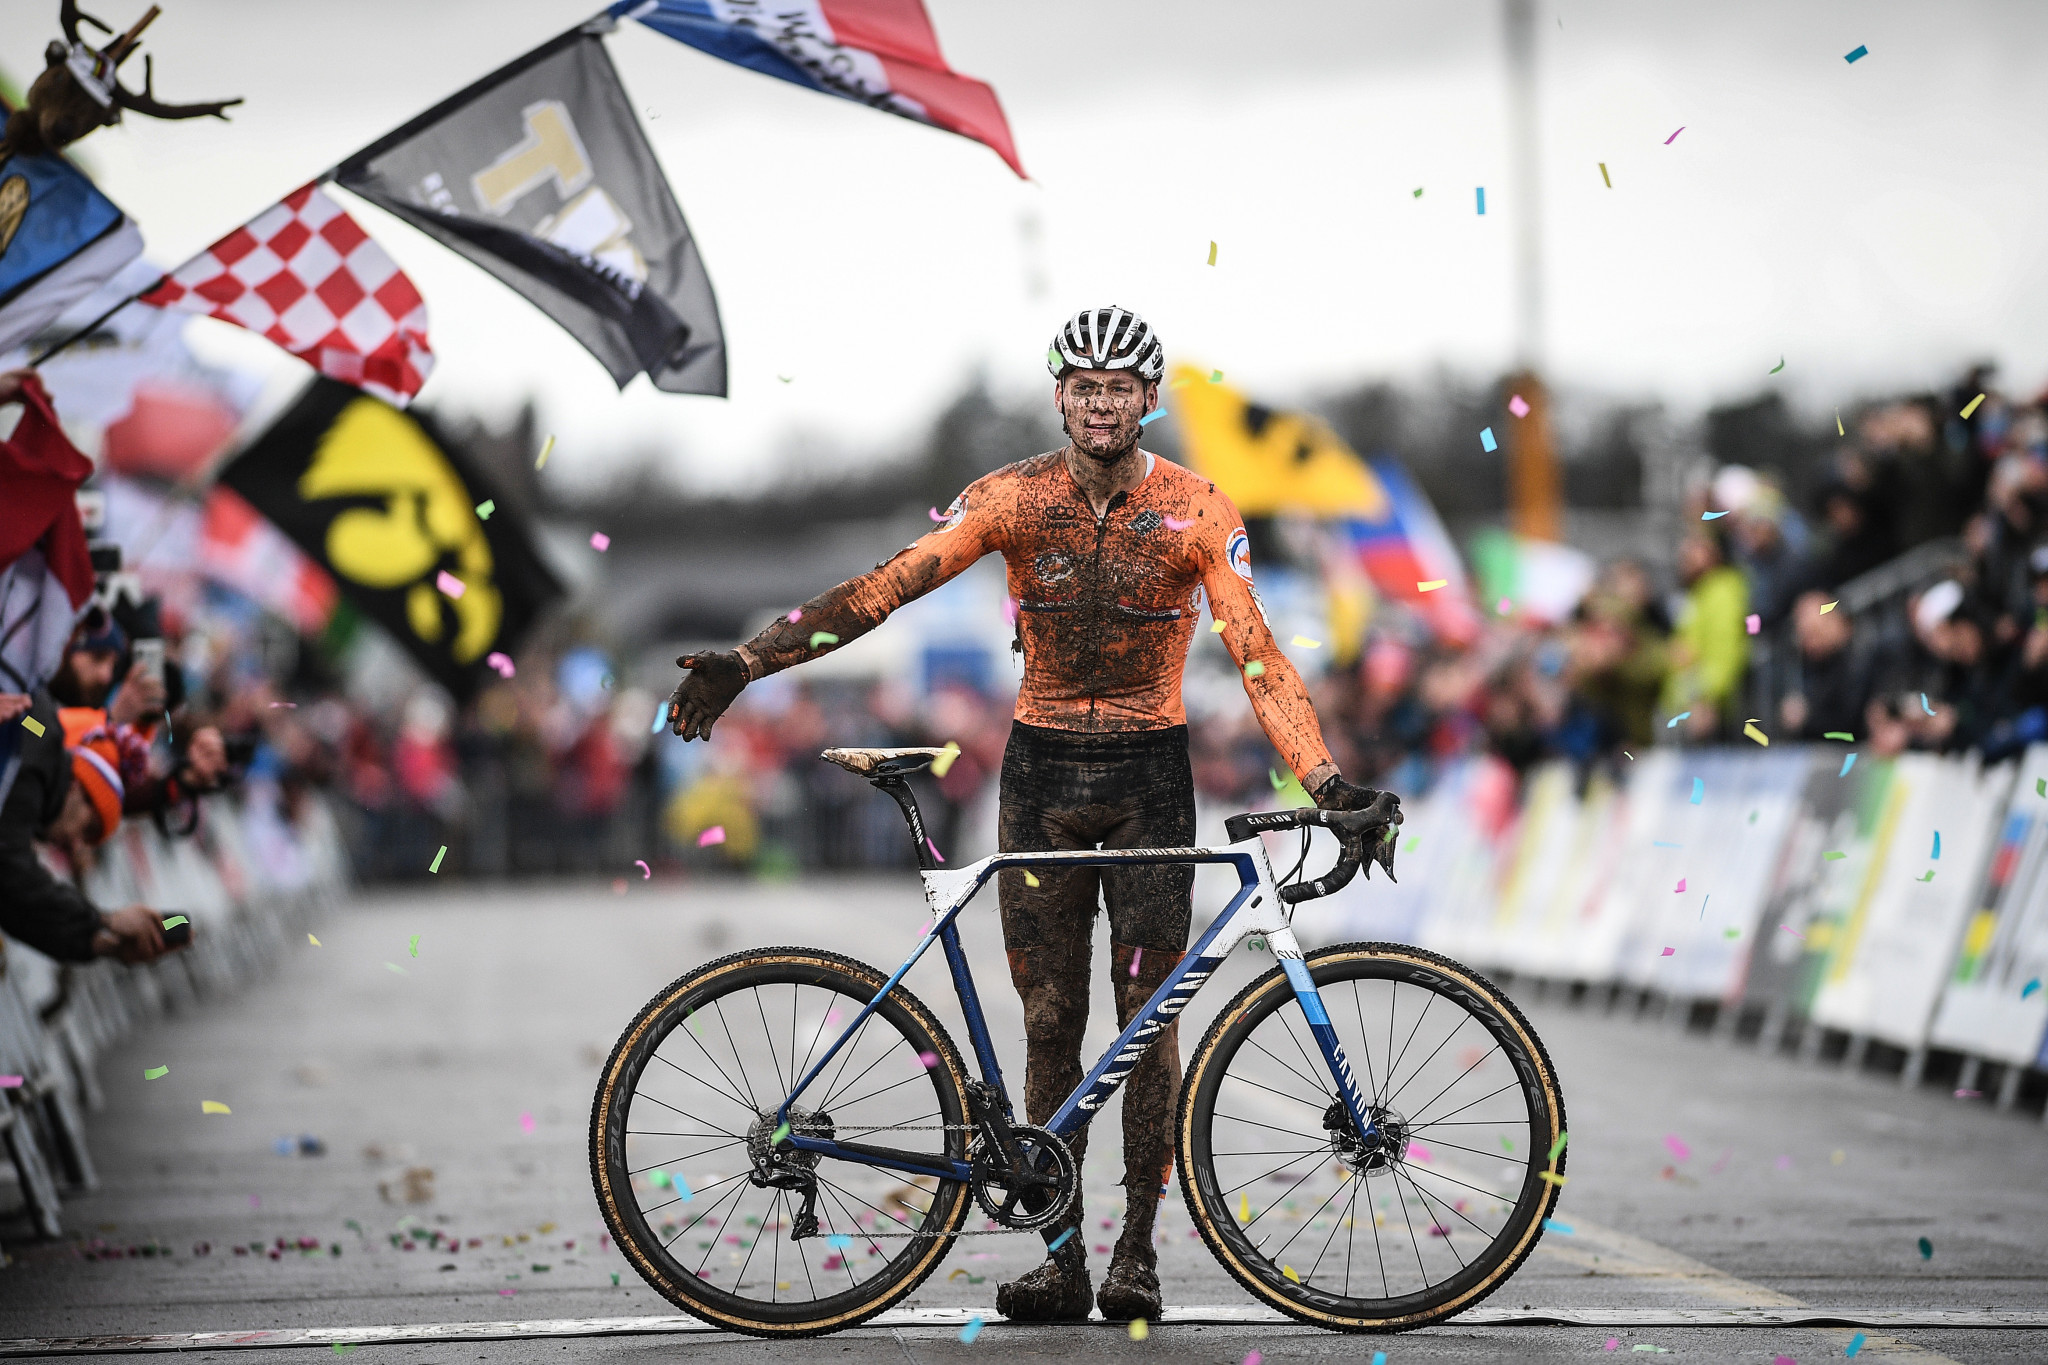 Van der Poel earns third title at UCI Cyclo-cross World Championships 